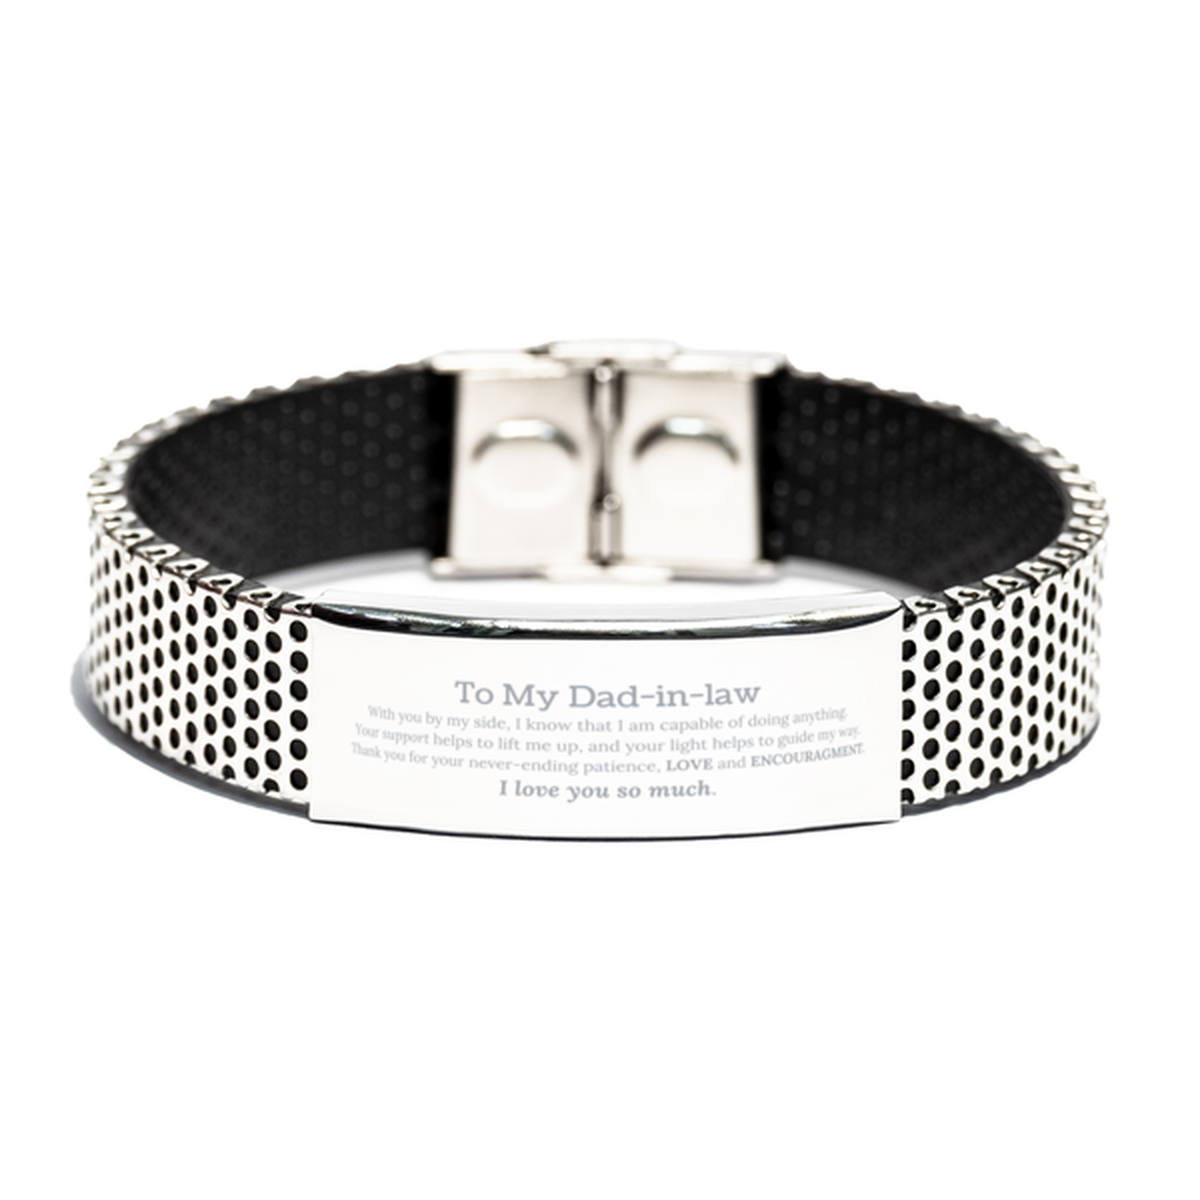 Appreciation Dad-in-law Stainless Steel Bracelet Gifts, To My Dad-in-law Birthday Christmas Wedding Keepsake Gifts for Dad-in-law With you by my side, I know that I am capable of doing anything. I love you so much